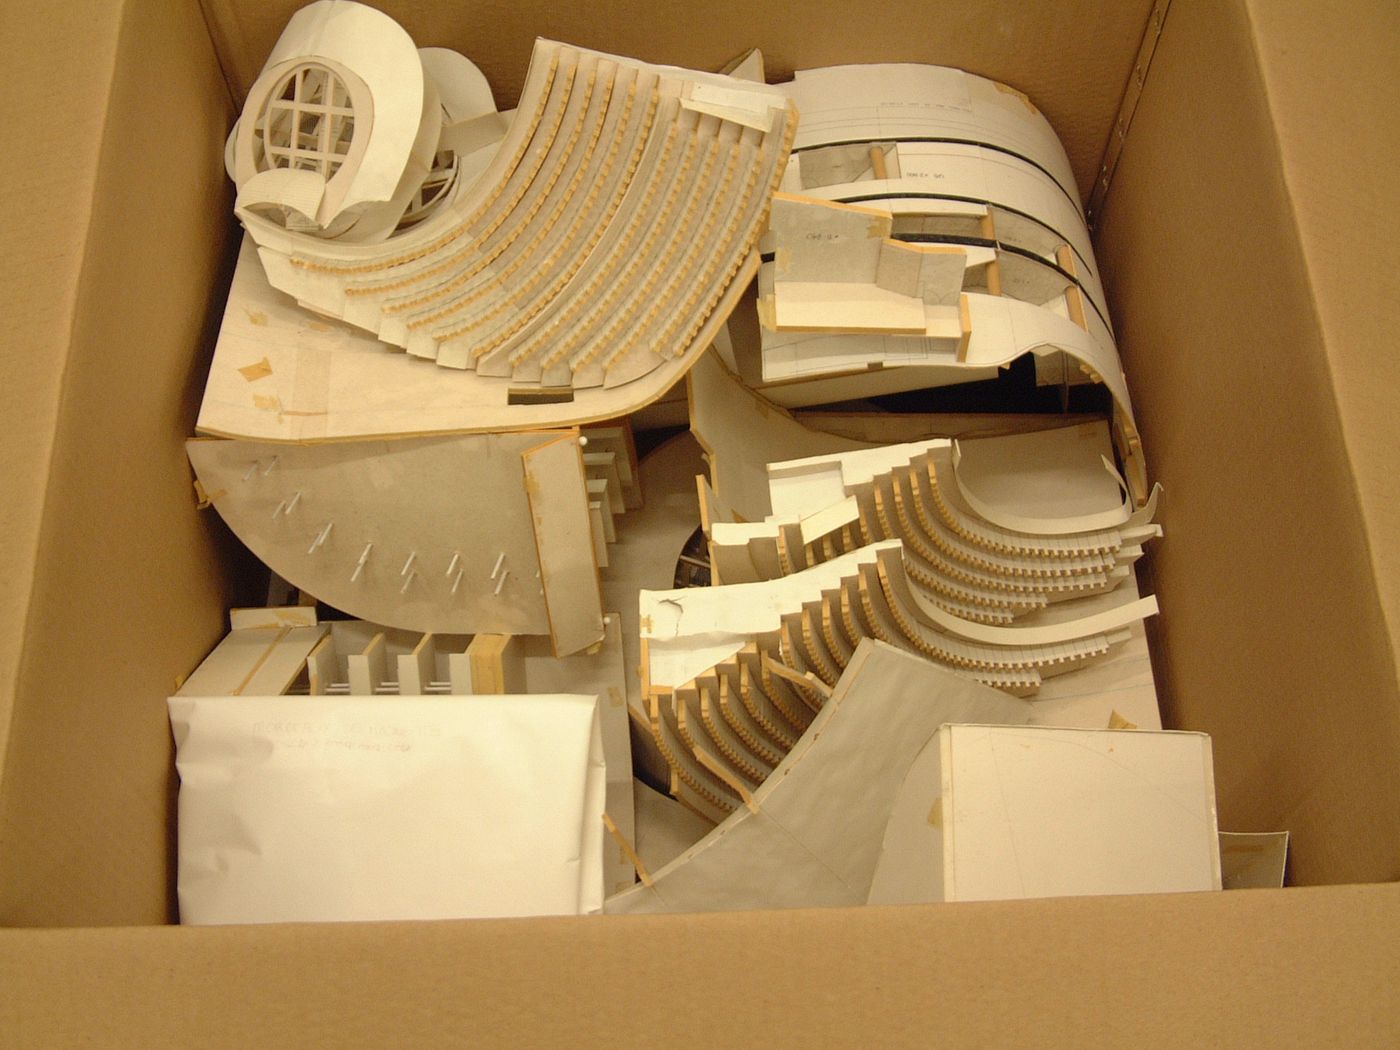 Models for interior, seating, lobbys and roof of theatres